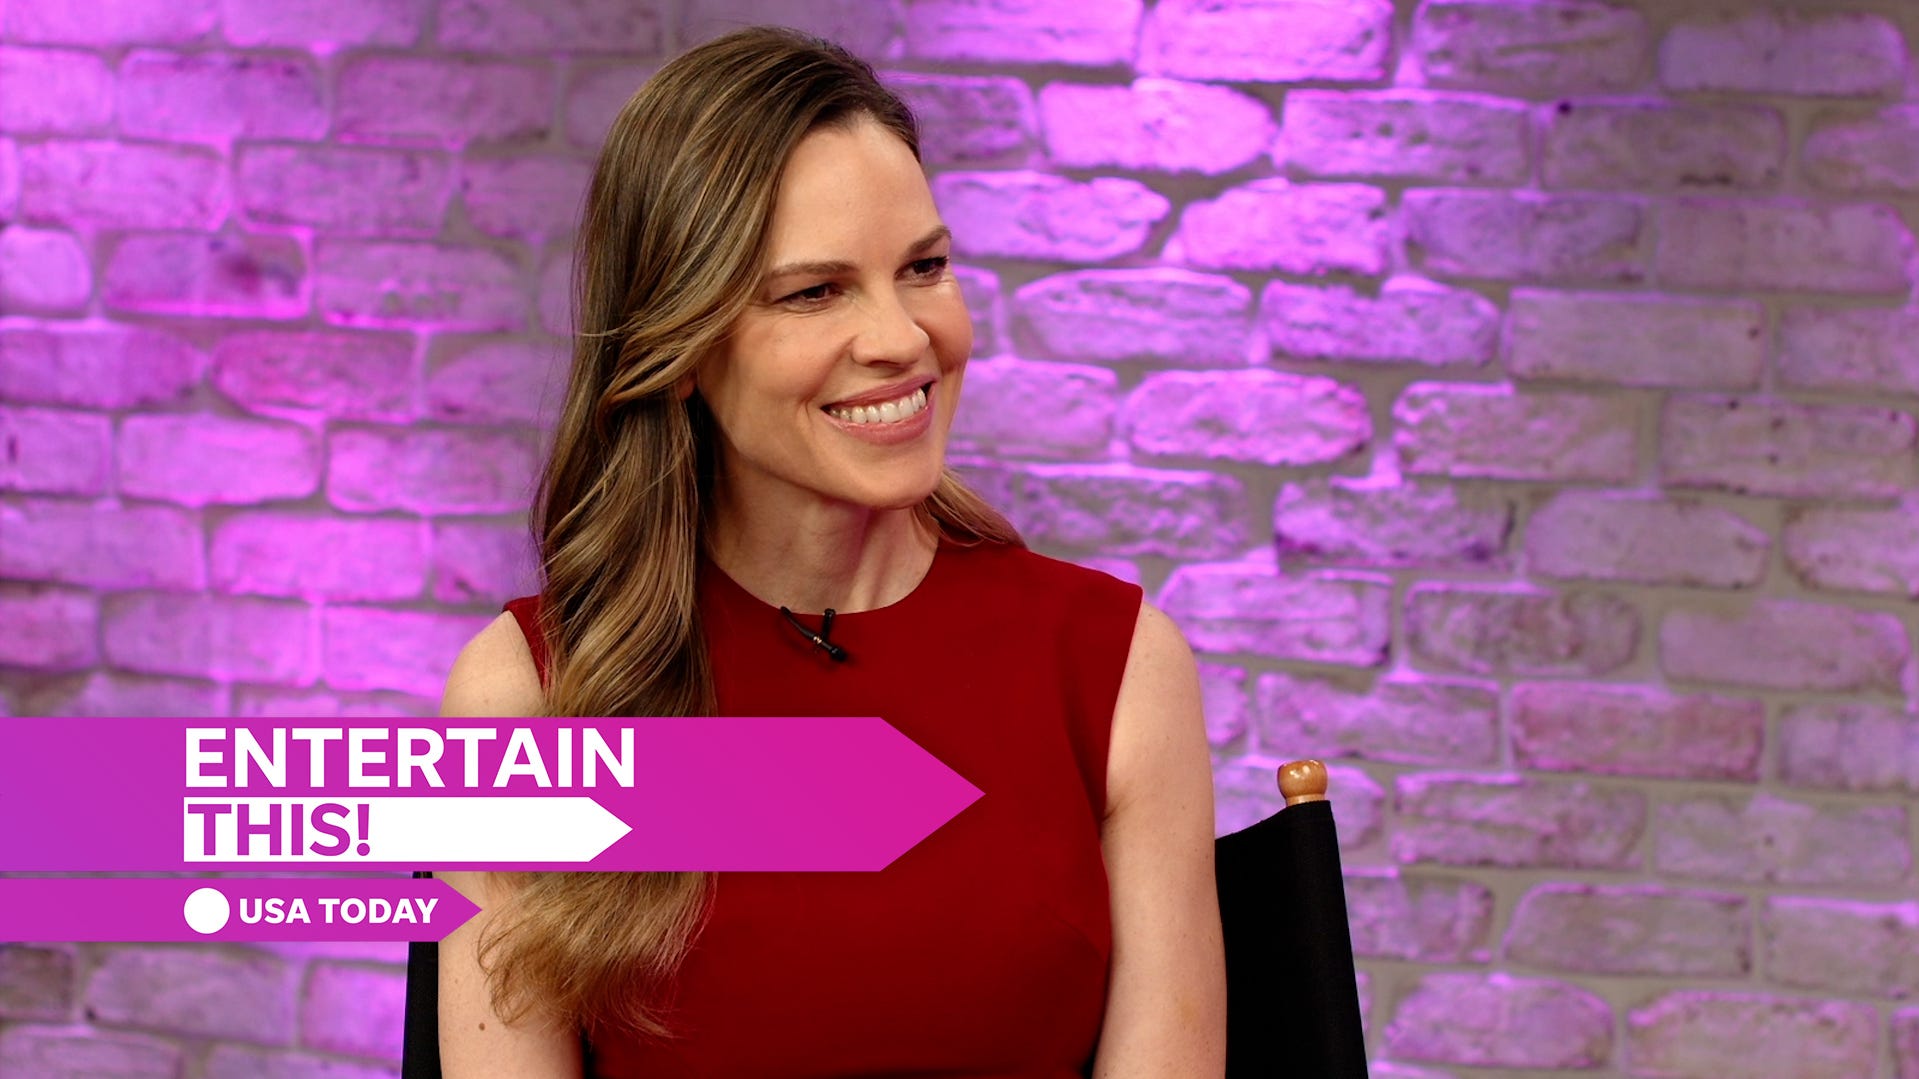 'Ordinary Angels' star Hilary Swank is still surprised when people recognize her in public